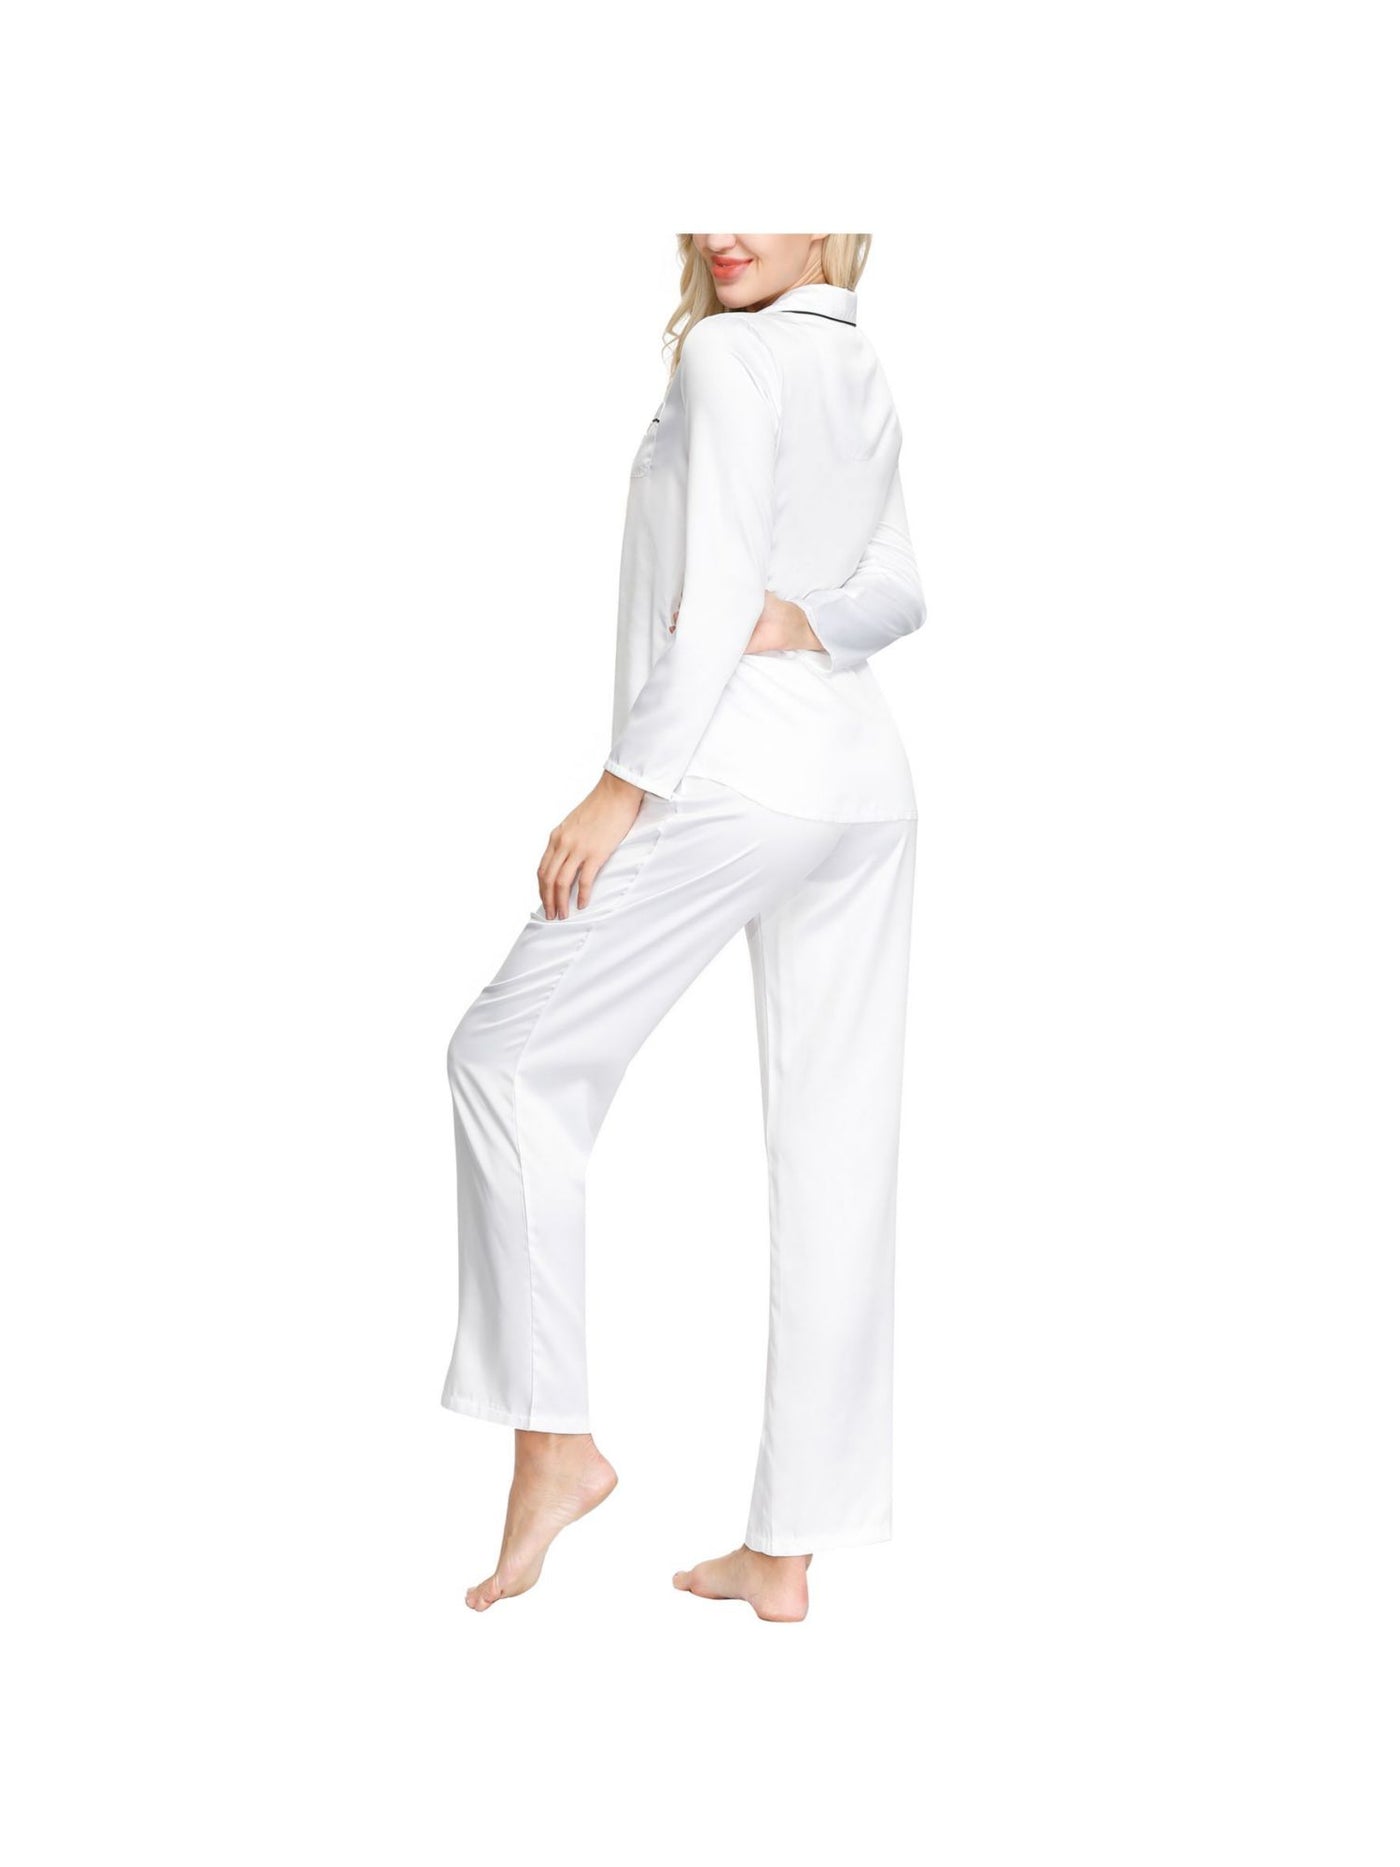 INK + IVY Womens White Notched Collar Long Sleeve Button Up Top Straight leg Pants Satin Pajamas XL